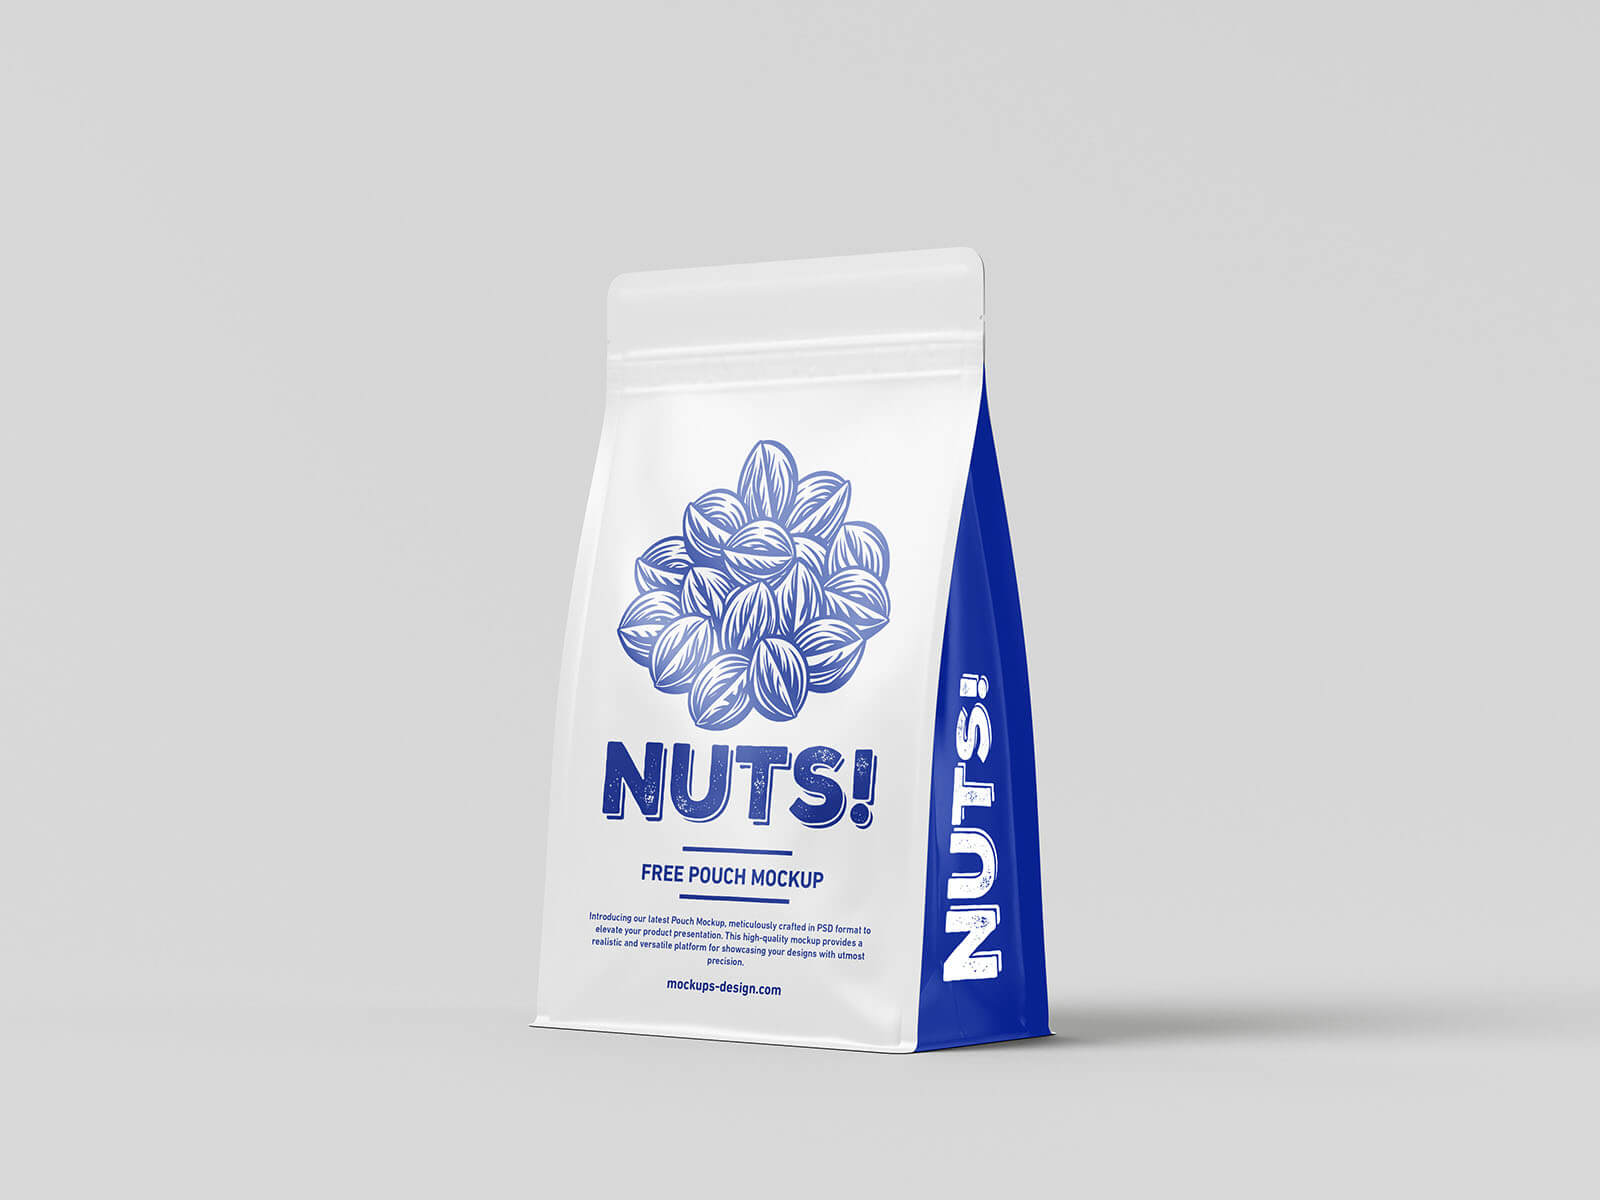 Free Pouch Mockup 3